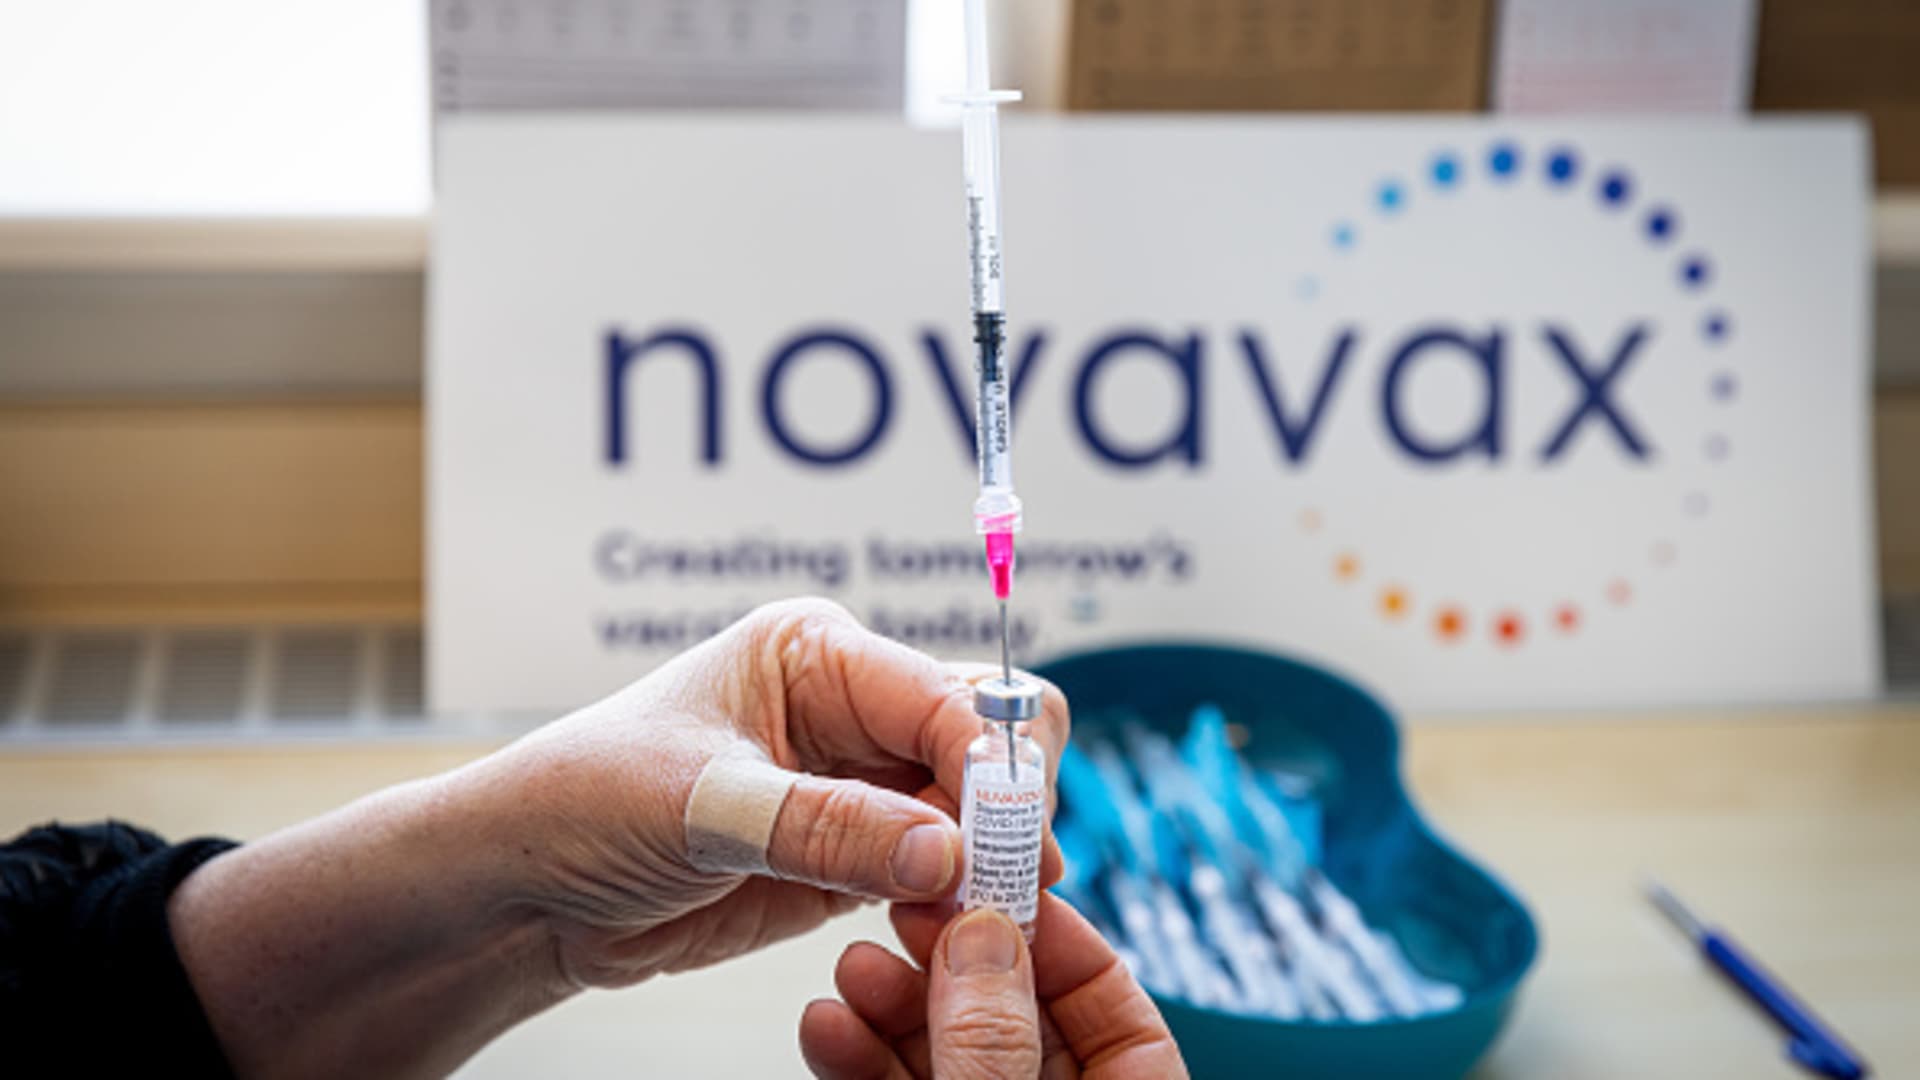 Novavax’s updated Covid vaccine can still catch up to Pfizer, Moderna shots this fall